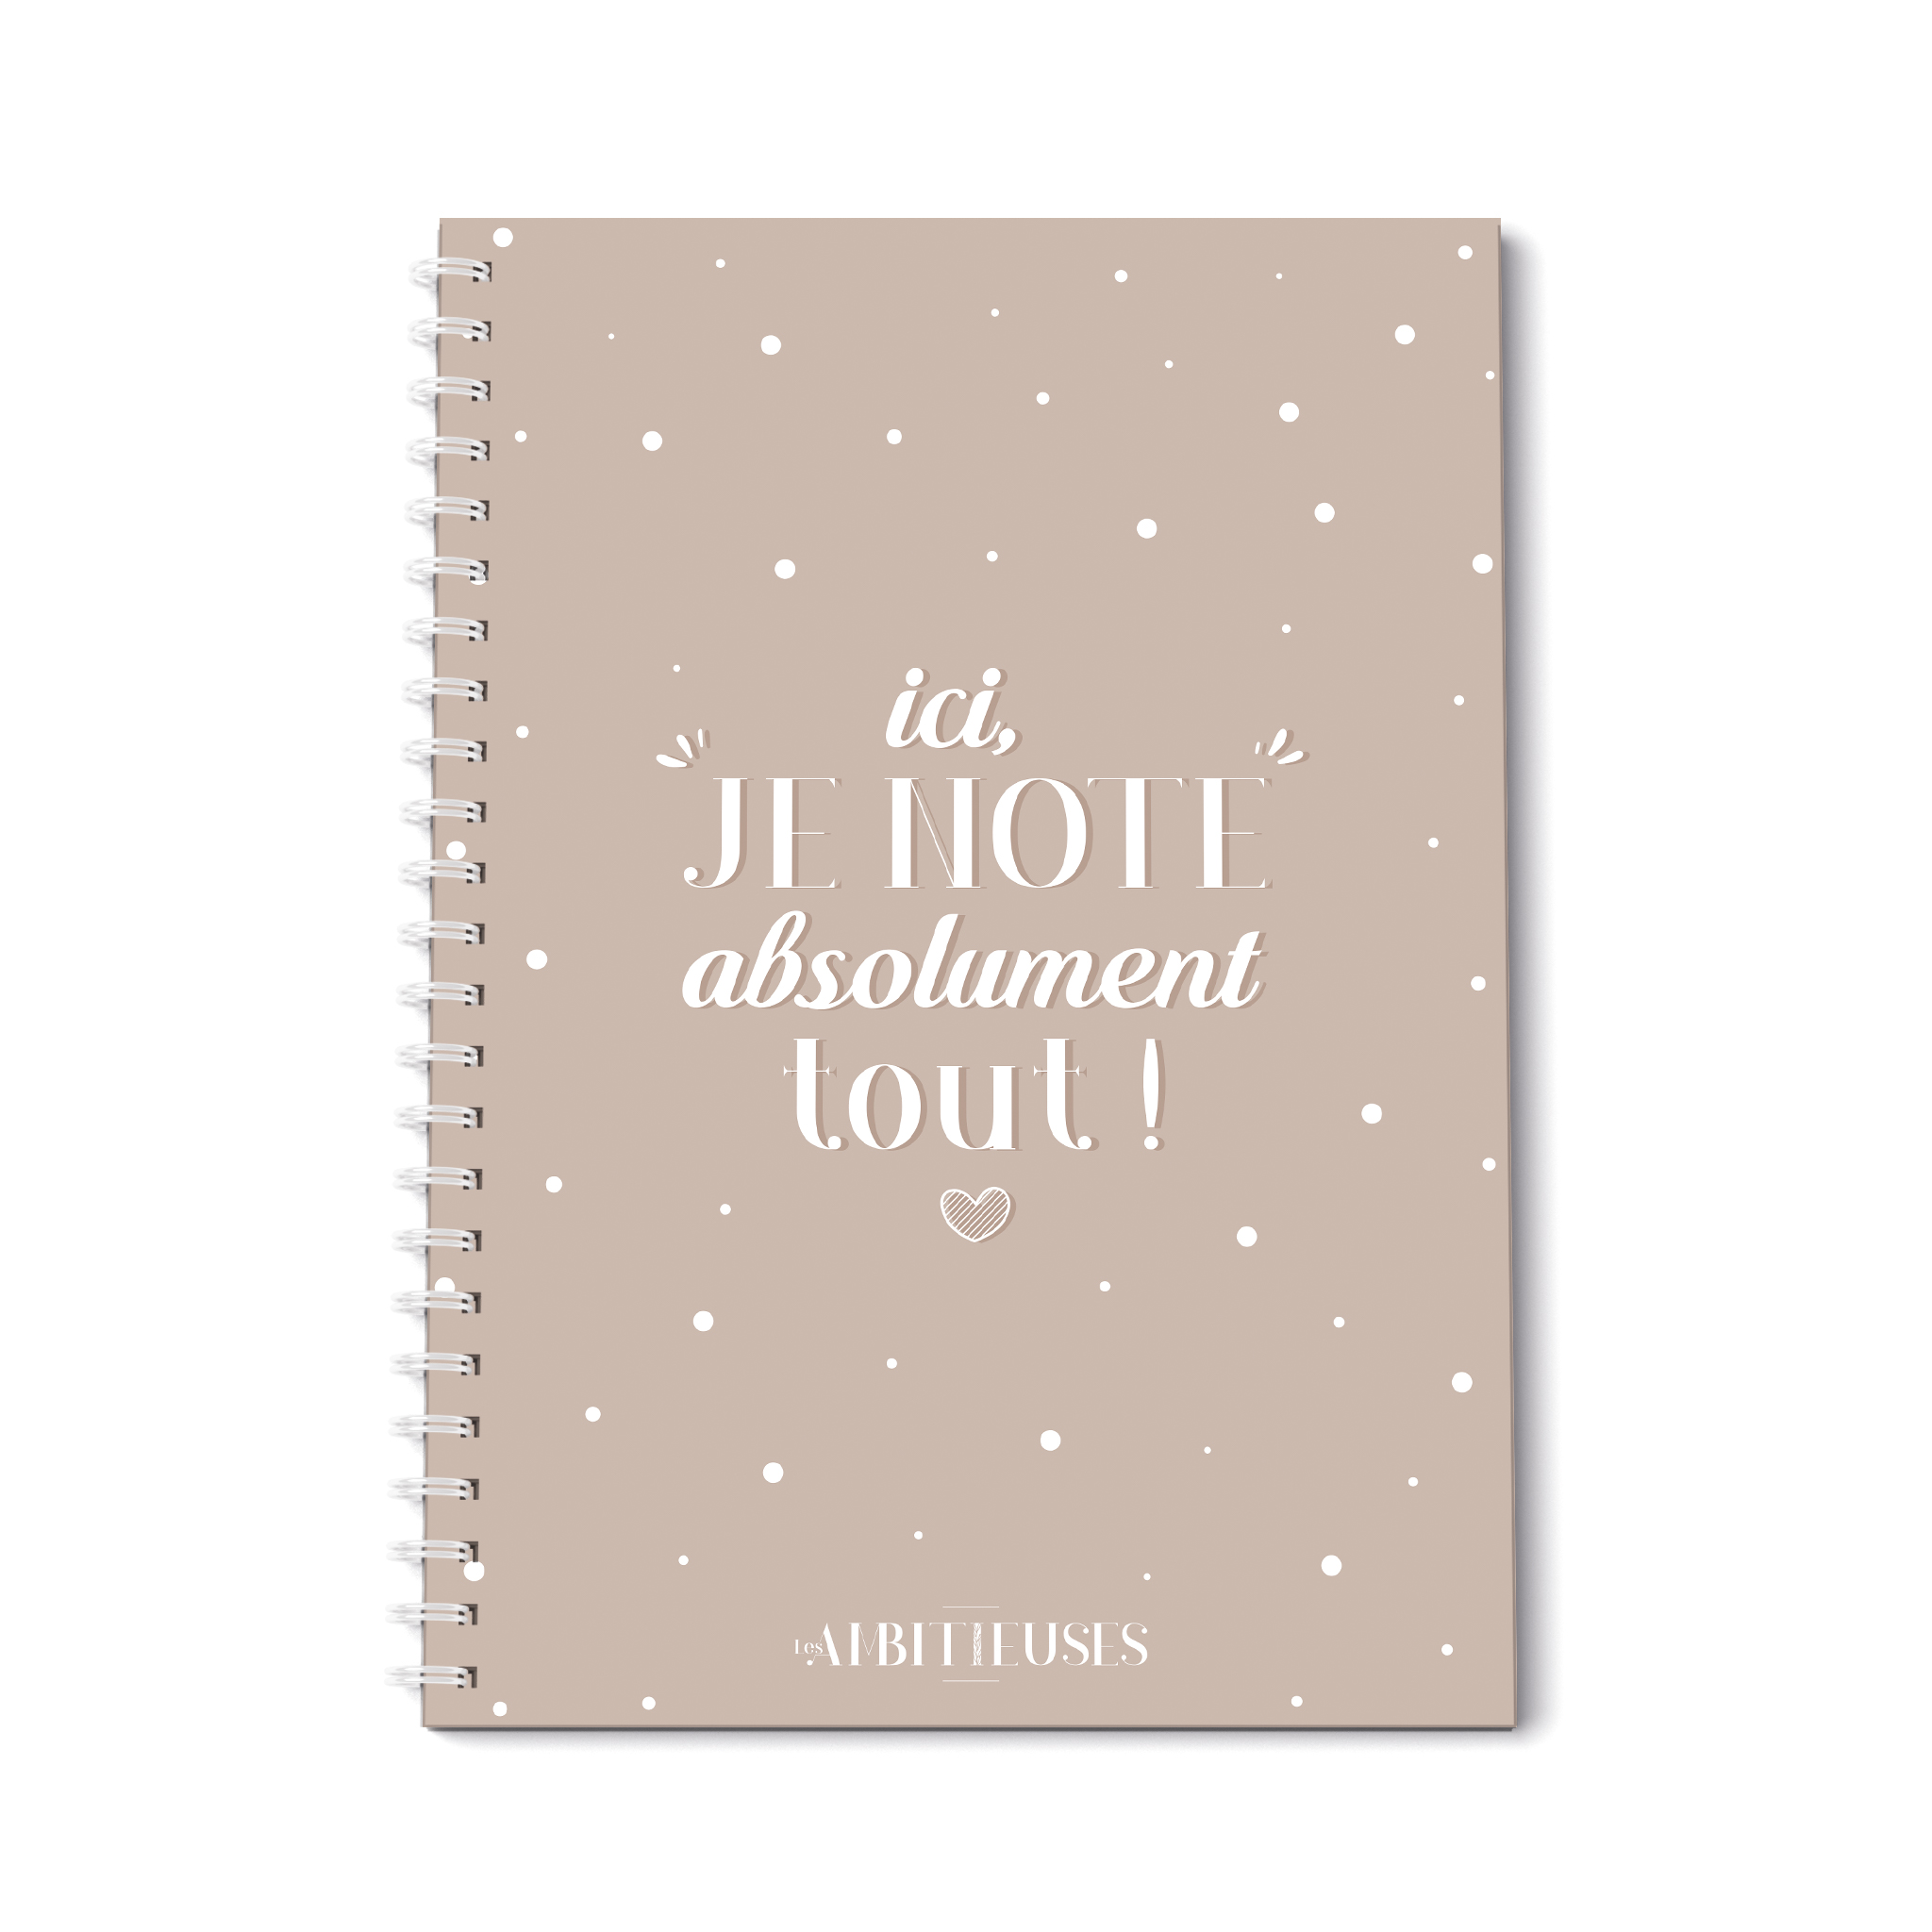 Carnet de notes cocooning taupe recto fond blanc